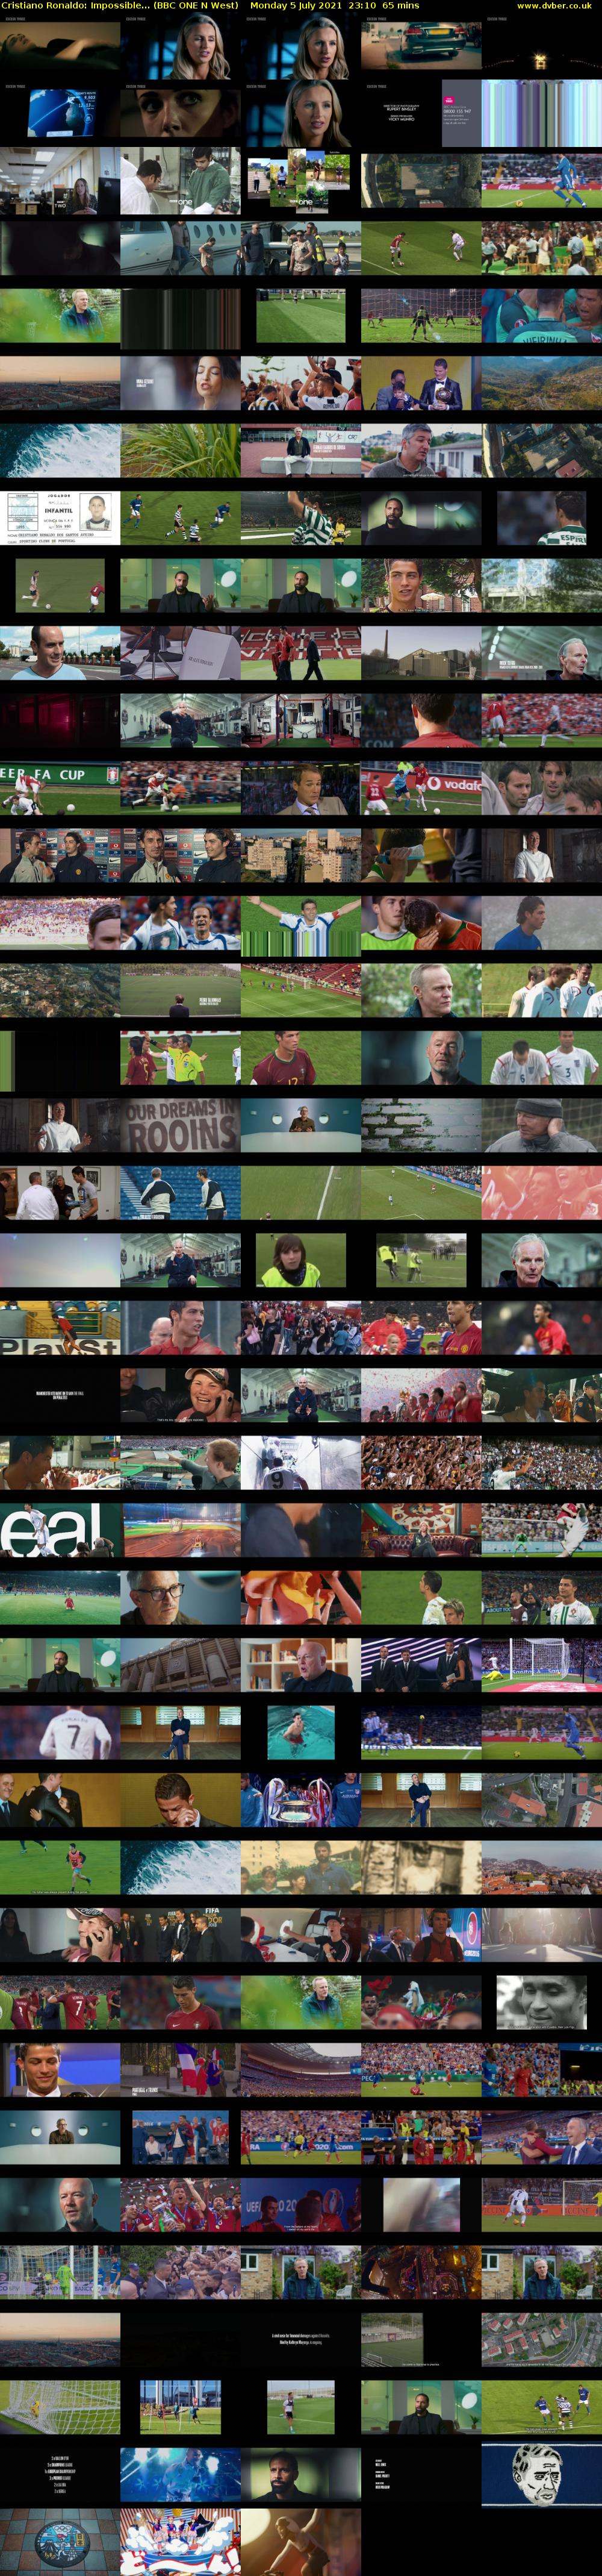 Cristiano Ronaldo: Impossible... (BBC ONE N West) Monday 5 July 2021 23:10 - 00:15